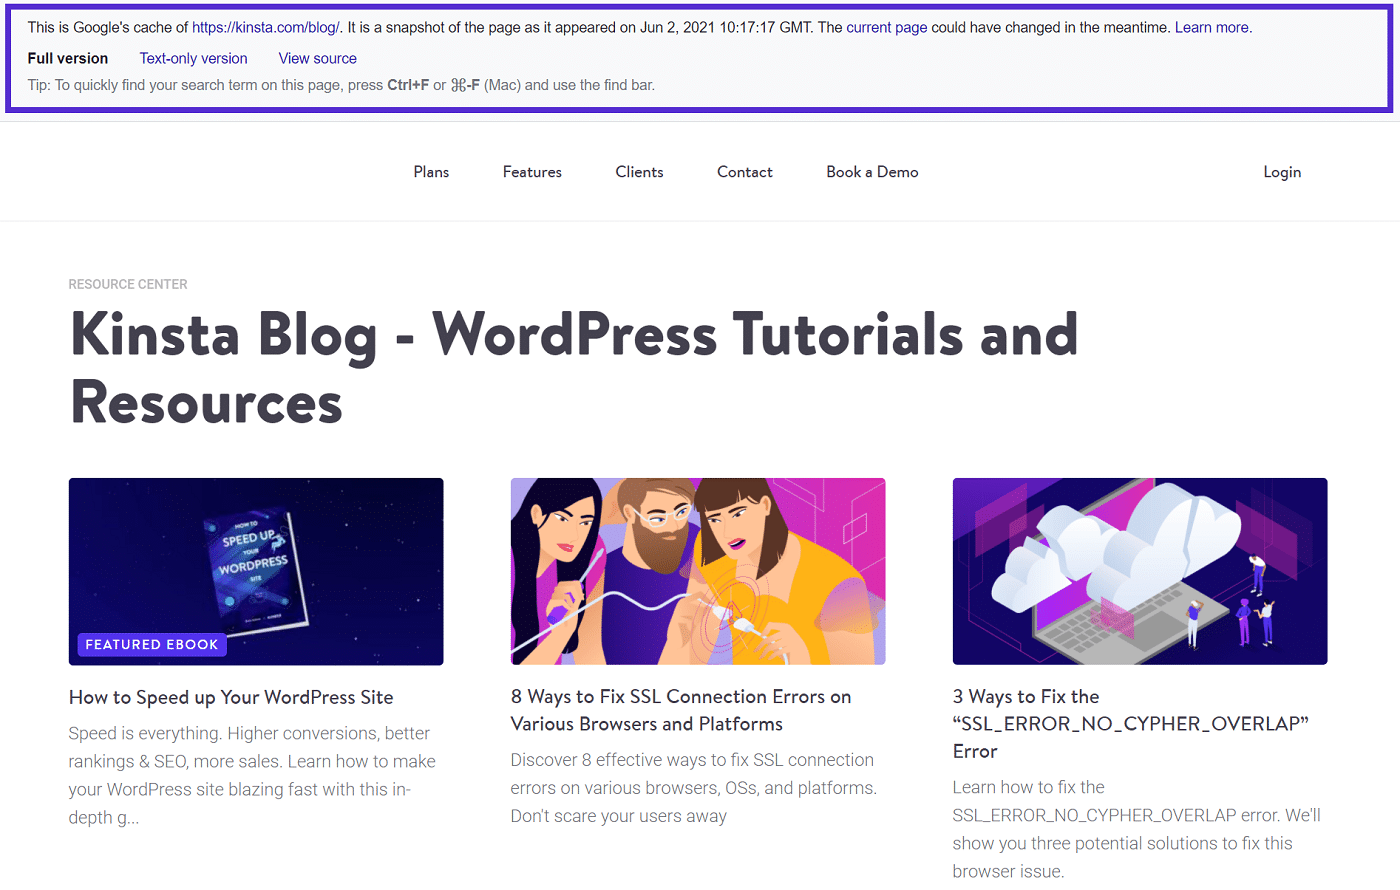 Screenshot of a cached version of a Kinsta page with the title "Kinsta Blog - WordPress Tutorials and Resources".